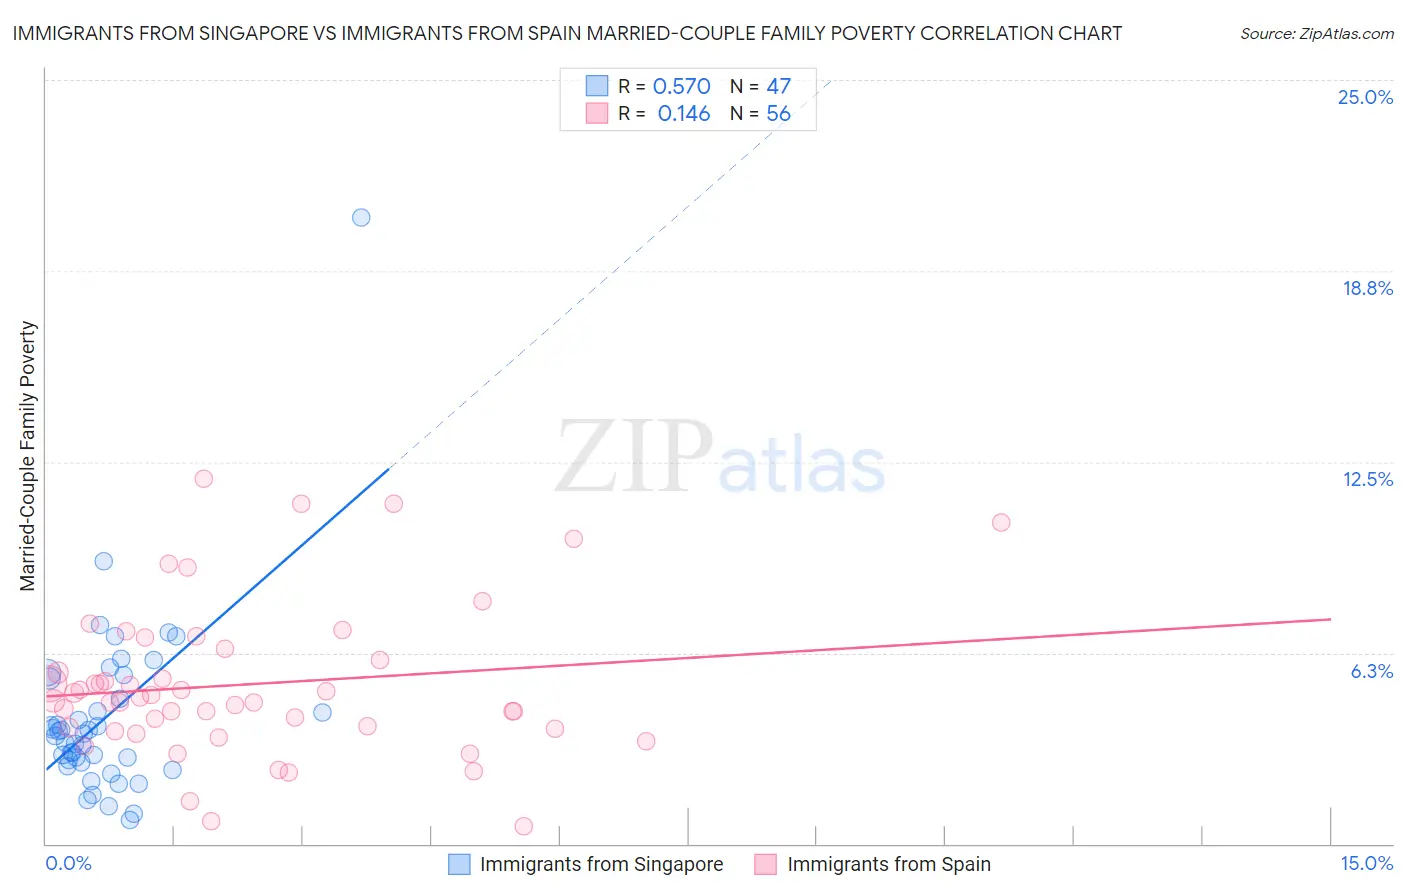 Immigrants from Singapore vs Immigrants from Spain Married-Couple Family Poverty